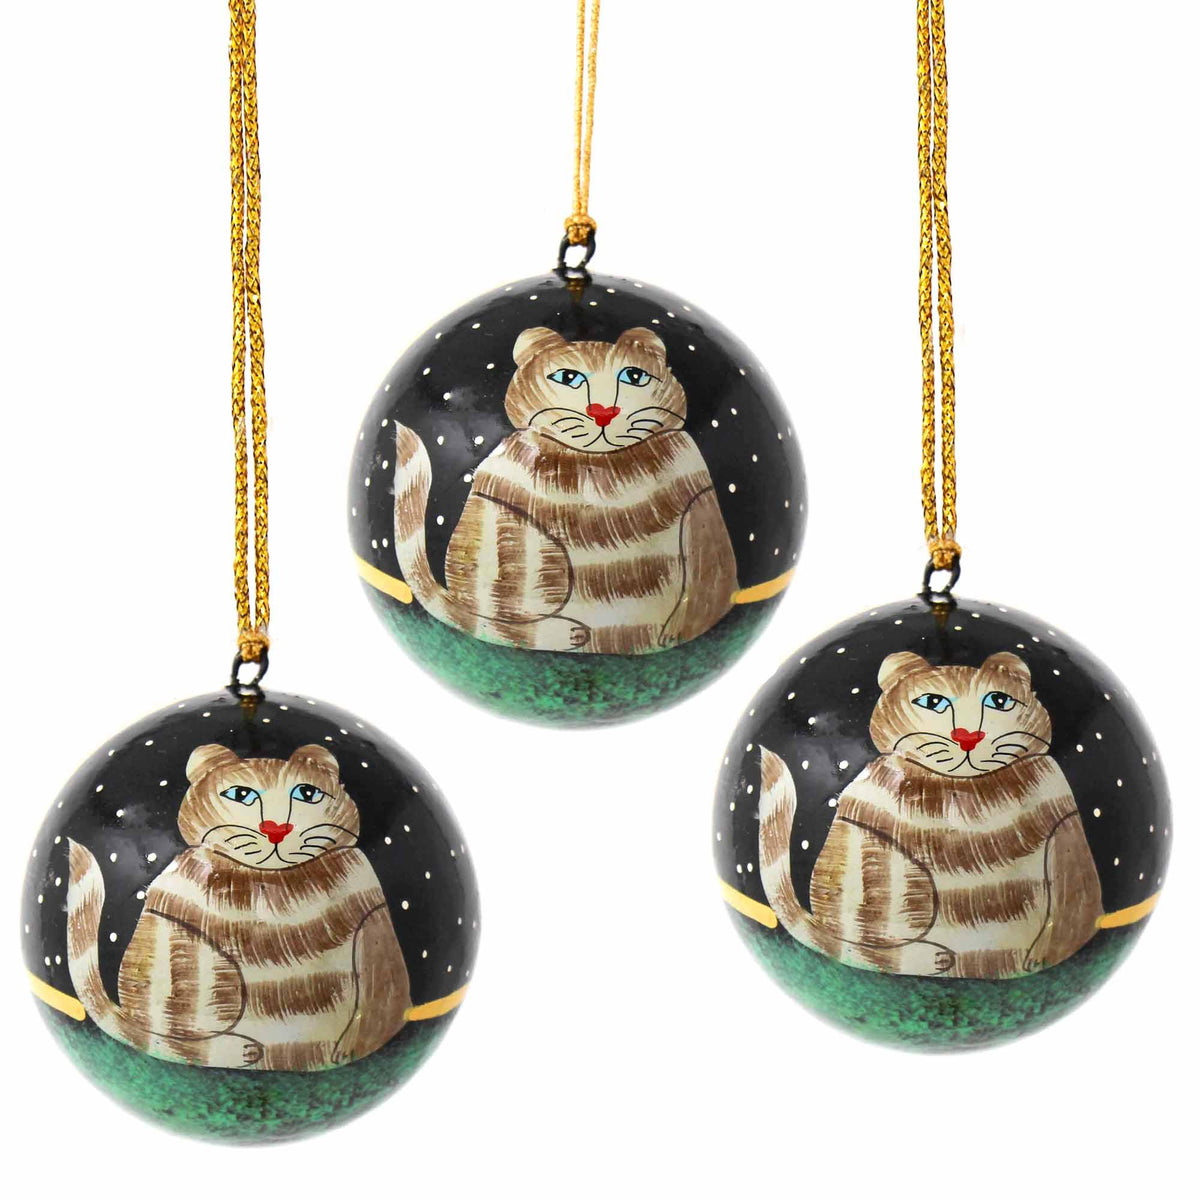 Handpainted Ornament Cat - Pack of 3 - Flyclothing LLC